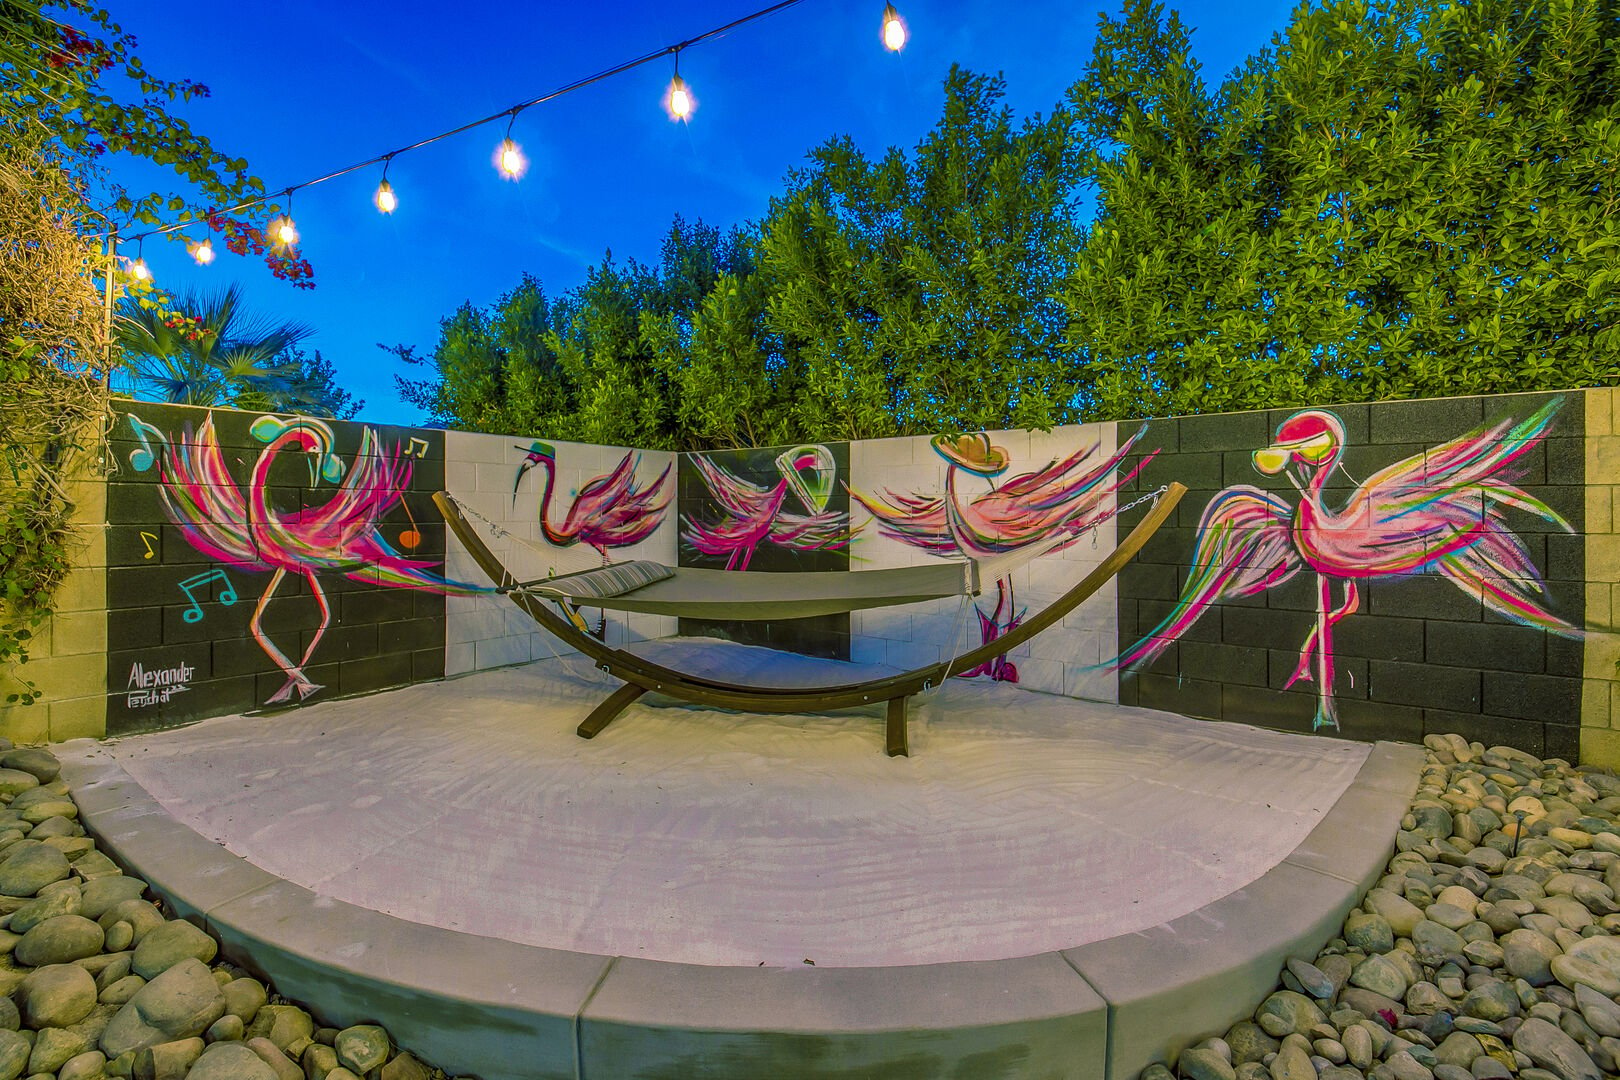 Unwind on the hammock and enjoy the view by the stunning hand painted flamingo artwork!